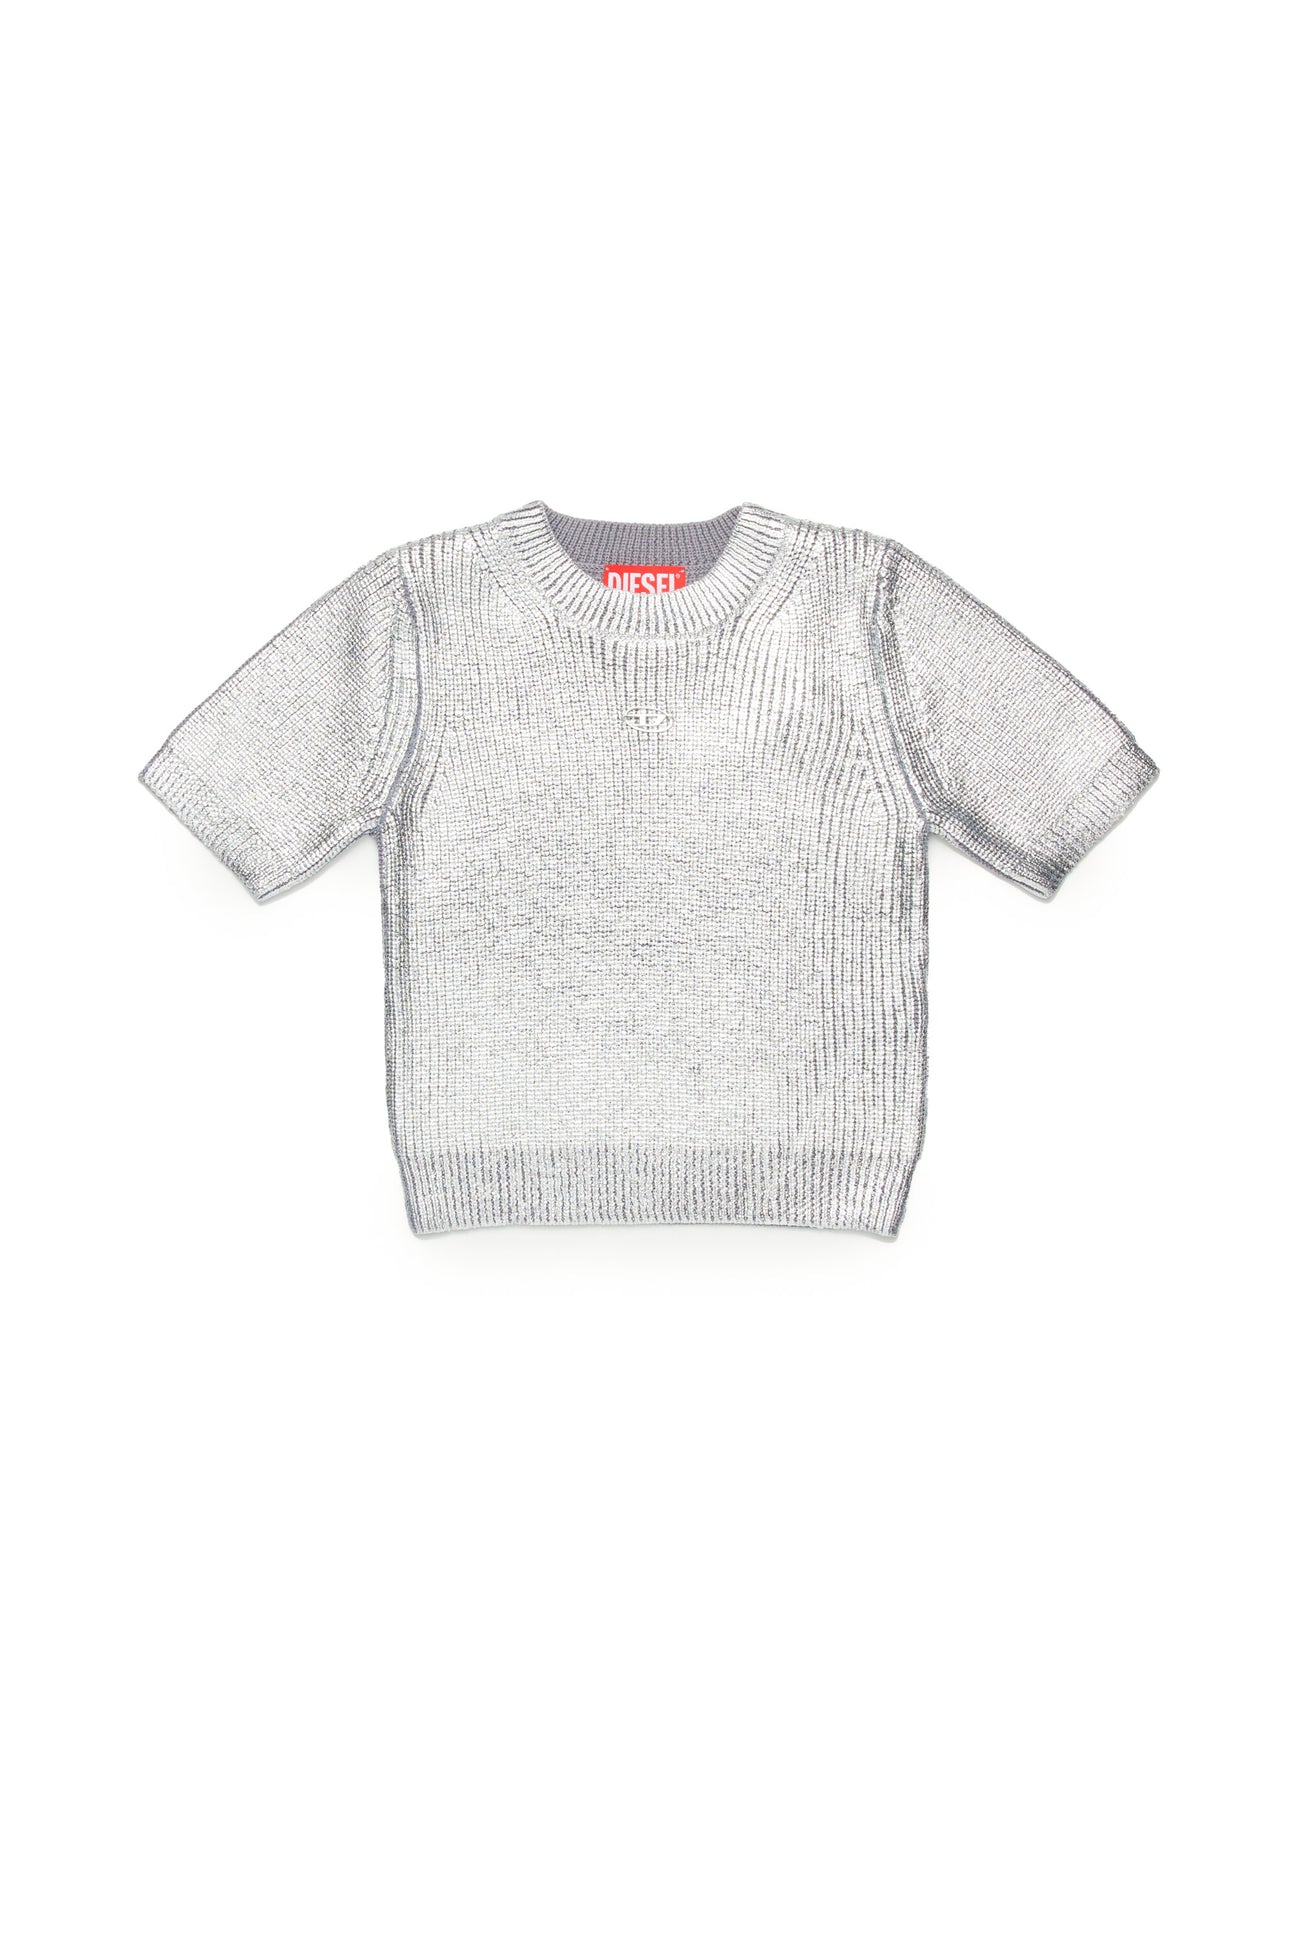 All-over silver mylar ribbed knitted top All-over silver mylar ribbed knitted top